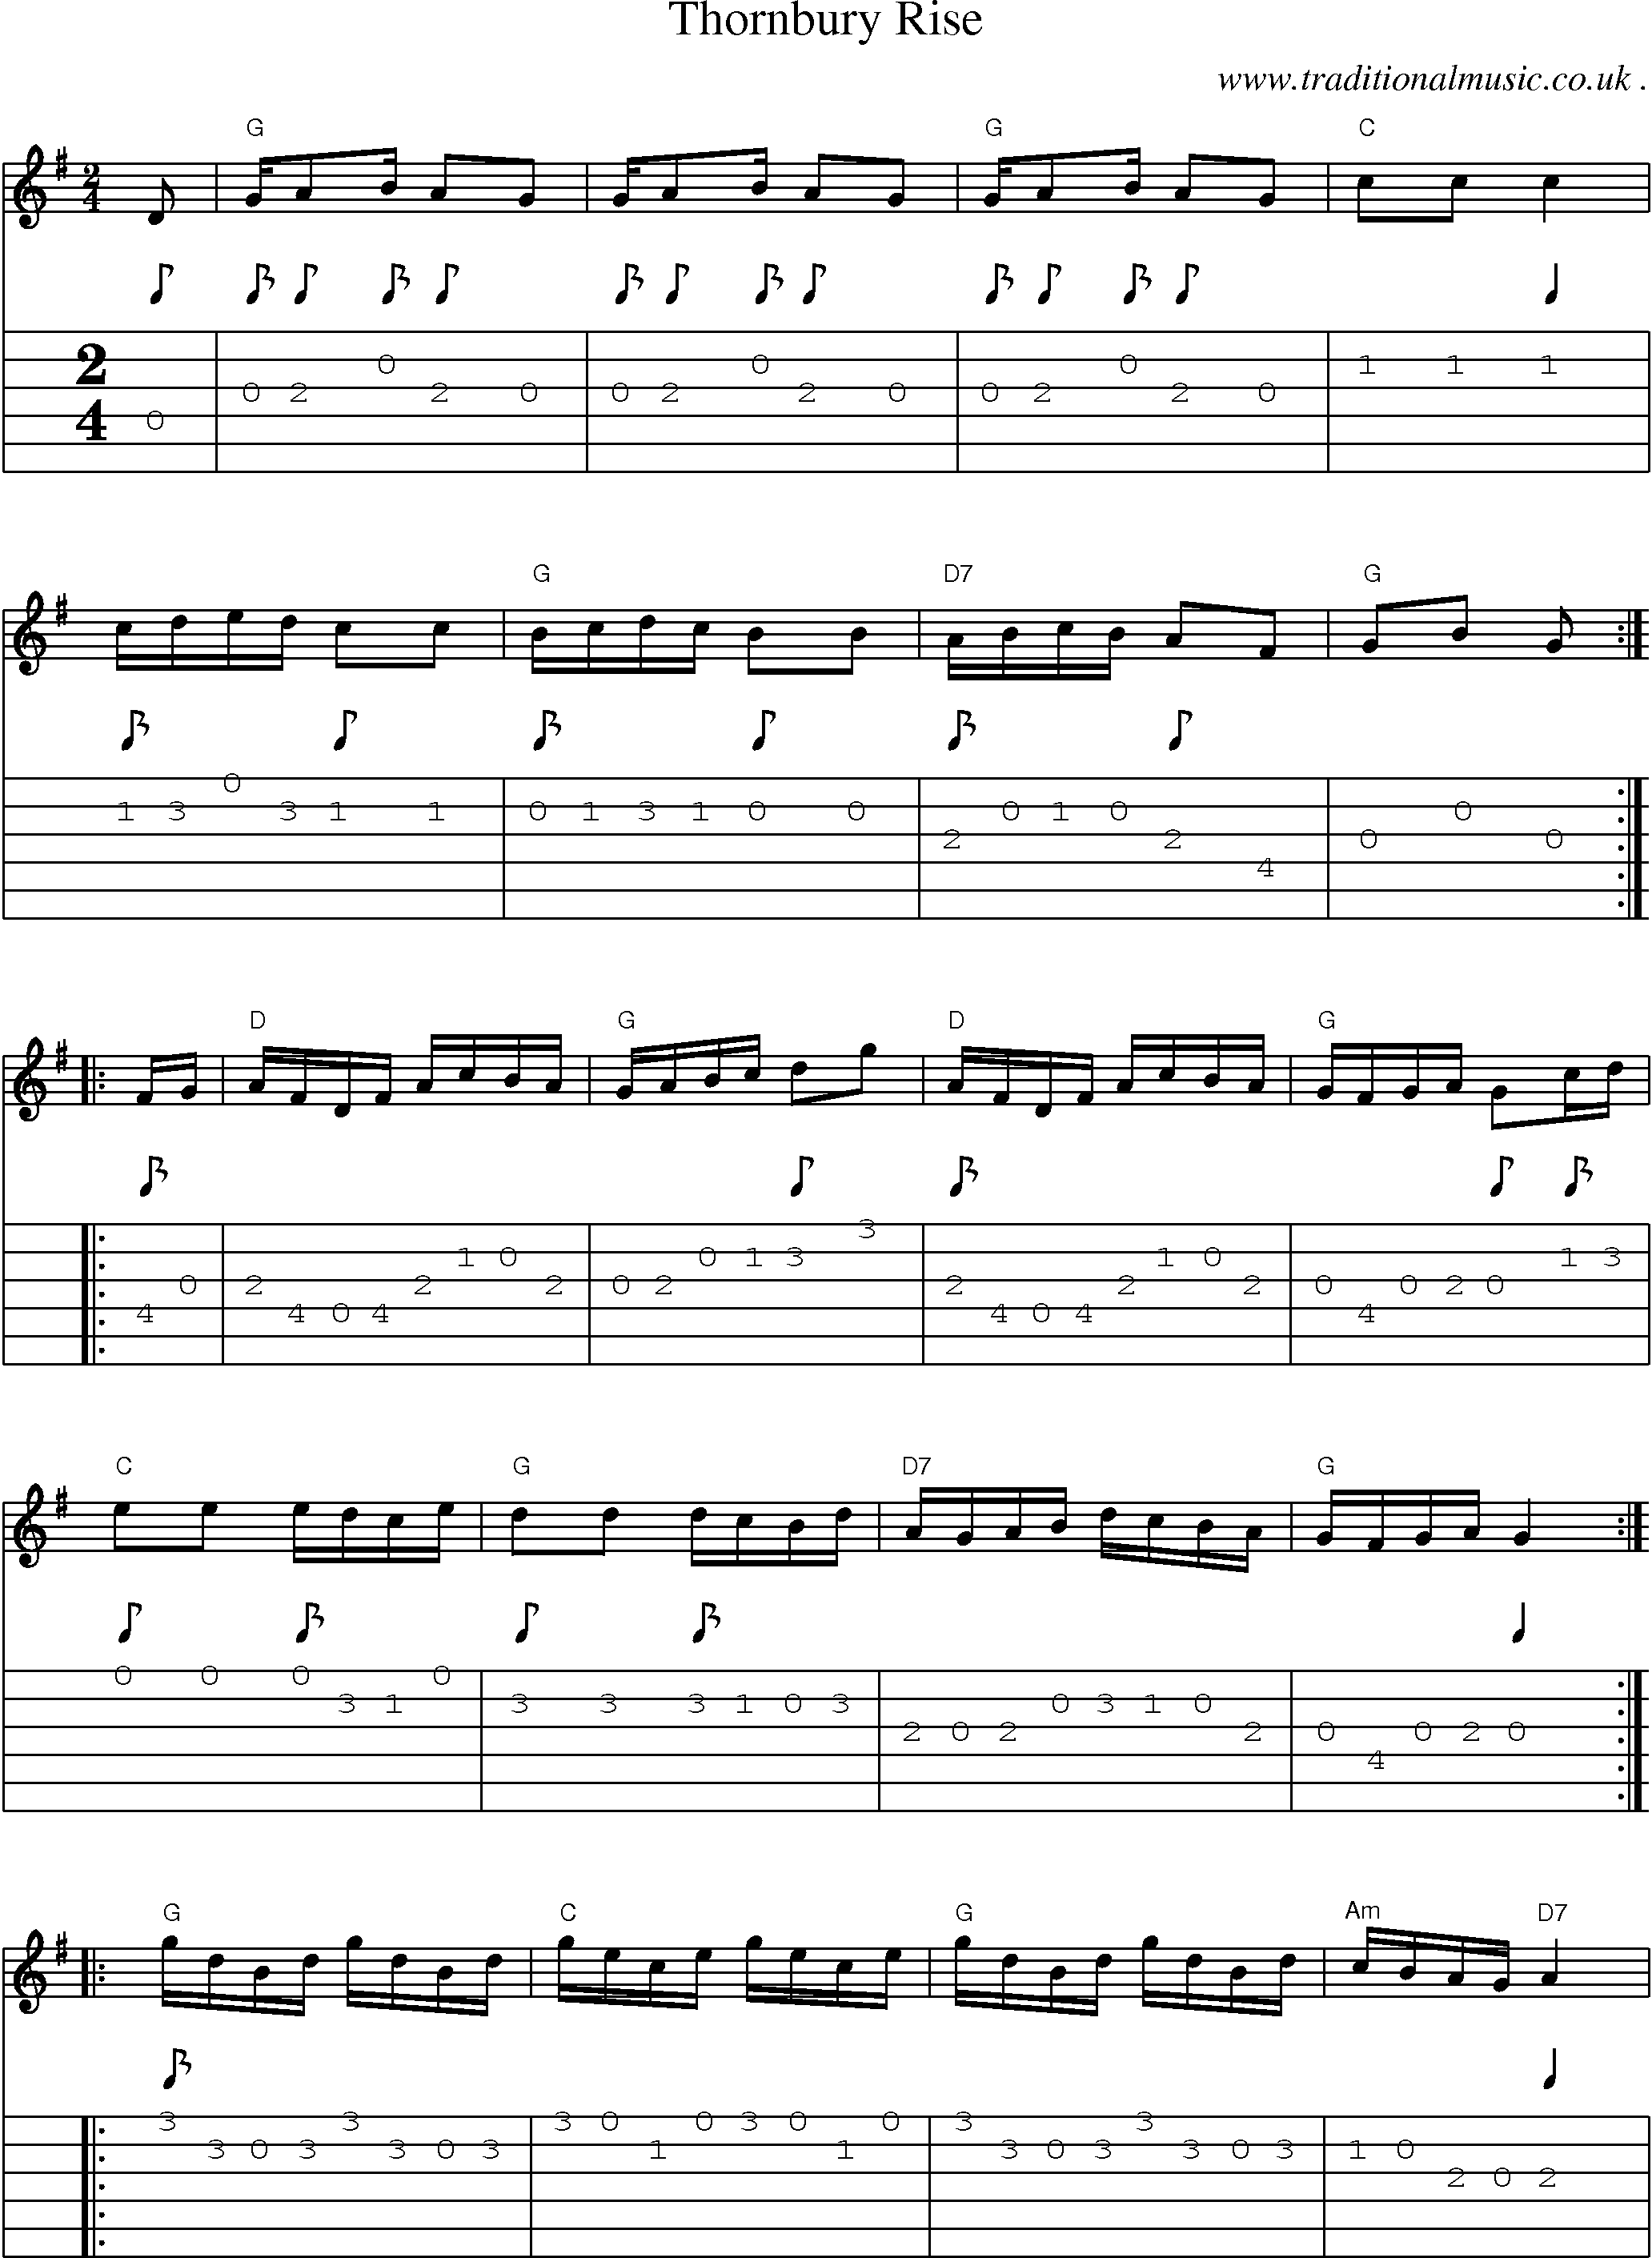 Sheet-Music and Guitar Tabs for Thornbury Rise